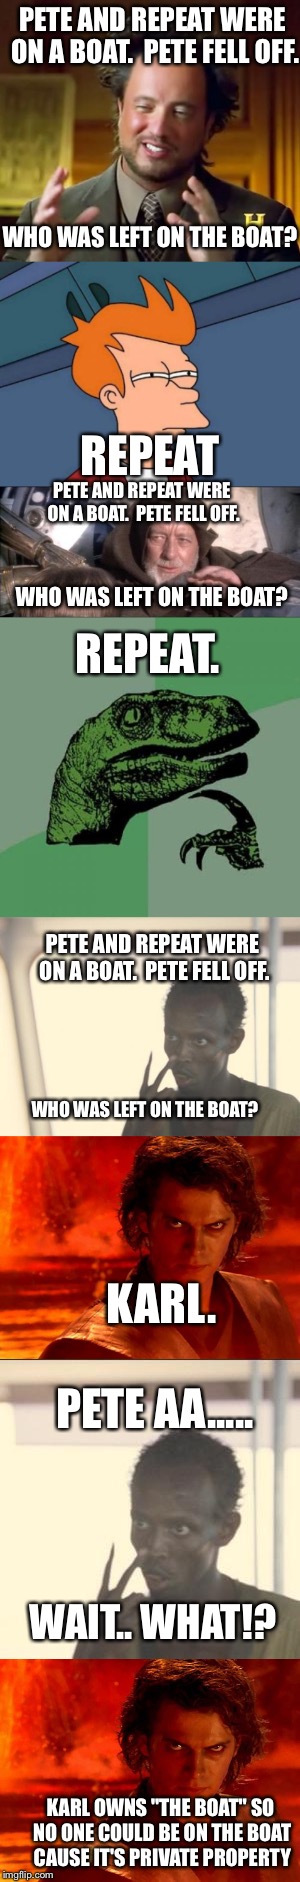 Look at the bottom | PETE AND REPEAT WERE ON A BOAT.  PETE FELL OFF. WHO WAS LEFT ON THE BOAT? REPEAT; PETE AND REPEAT WERE ON A BOAT.  PETE FELL OFF. REPEAT. WHO WAS LEFT ON THE BOAT? PETE AND REPEAT WERE ON A BOAT.  PETE FELL OFF. WHO WAS LEFT ON THE BOAT? KARL. PETE AA..... WAIT.. WHAT!? KARL OWNS "THE BOAT" SO NO ONE COULD BE ON THE BOAT CAUSE IT'S PRIVATE PROPERTY | image tagged in funny | made w/ Imgflip meme maker